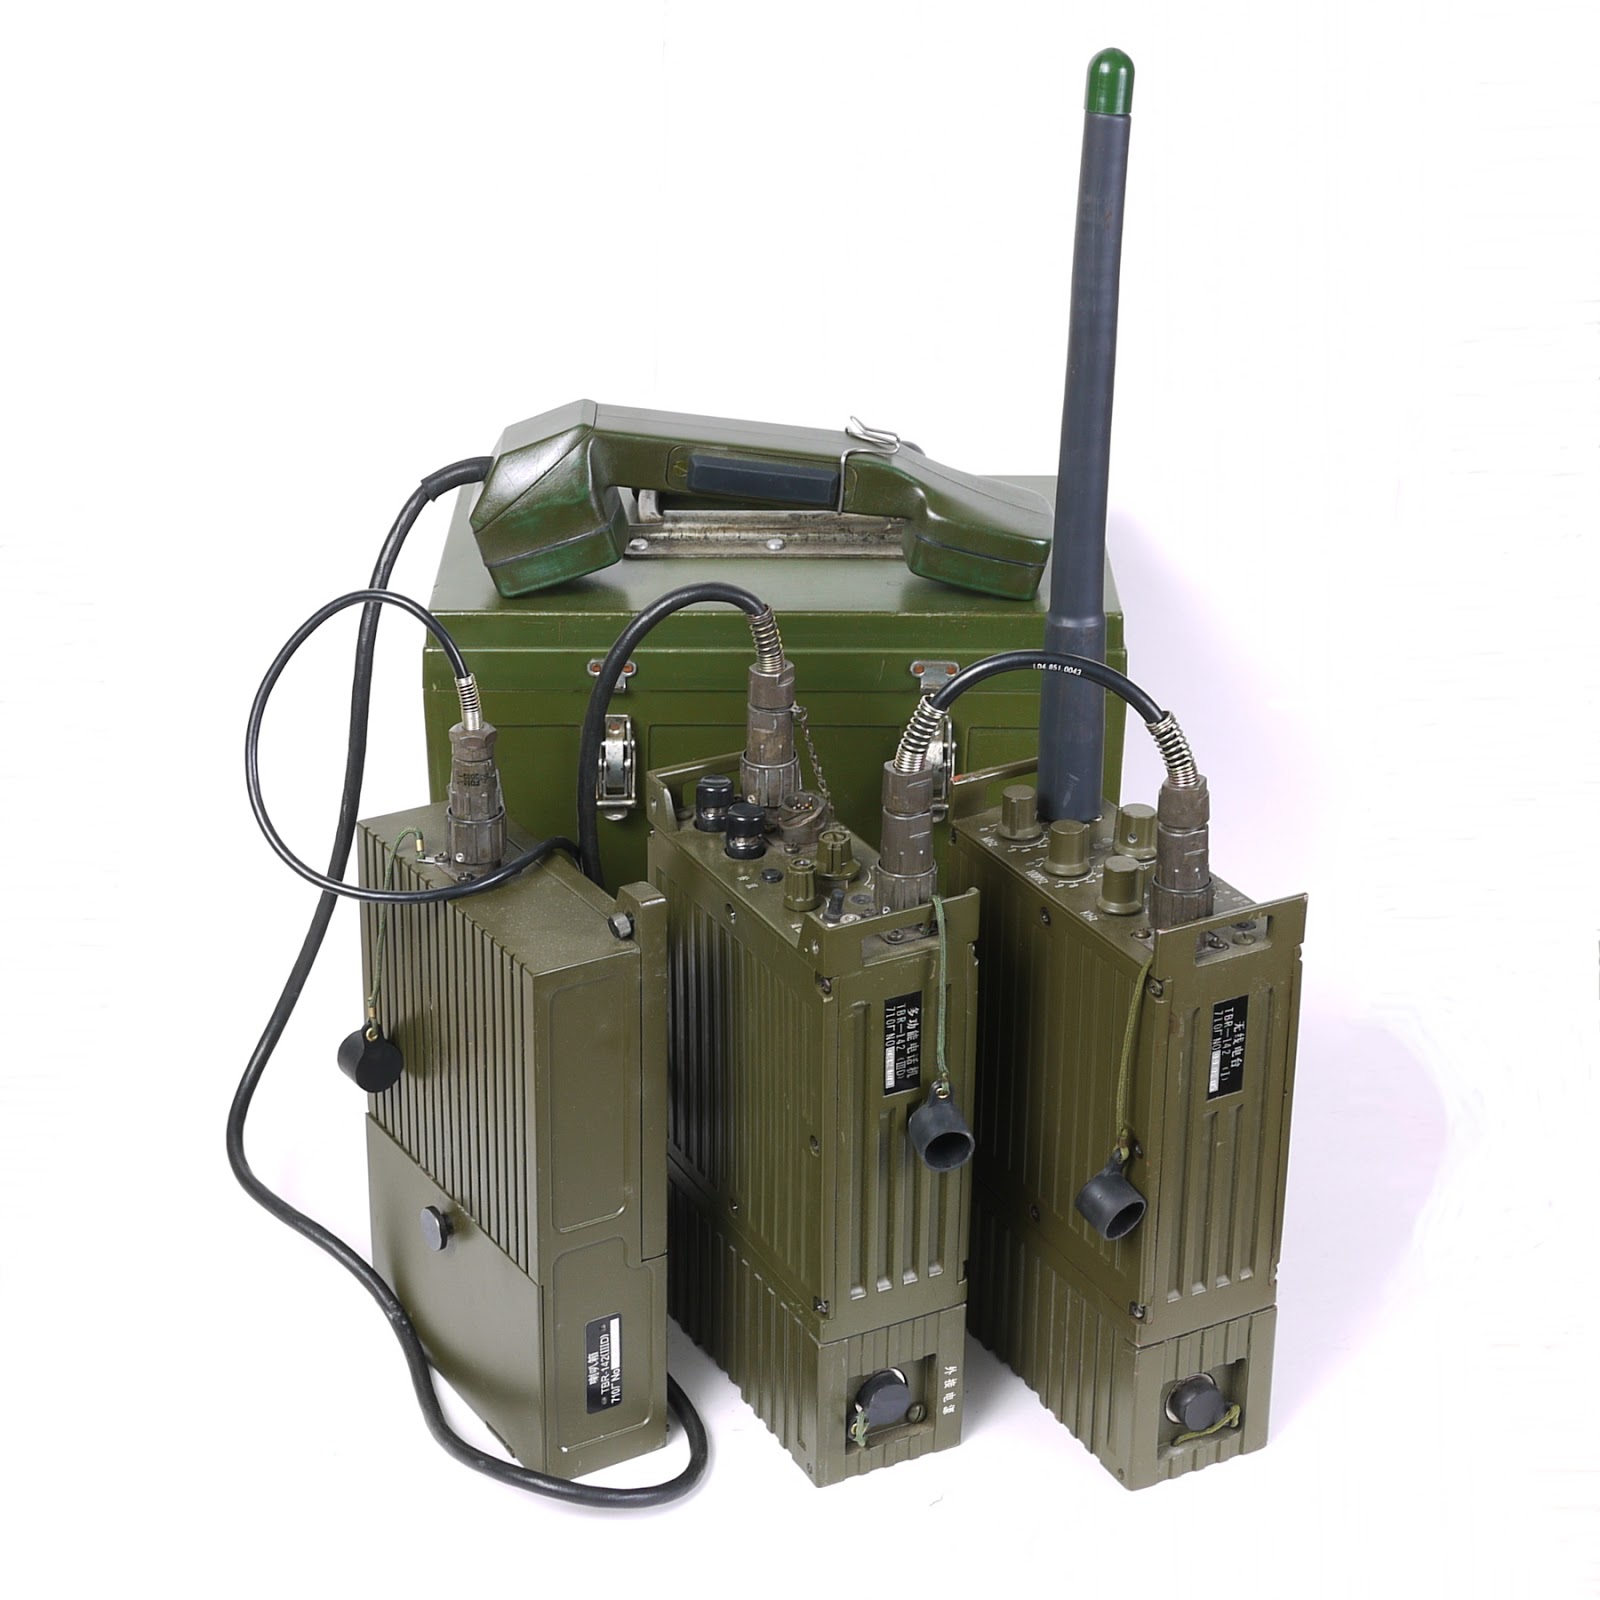 Chinese Military Radio: Tbr-142 Artillery Communication System